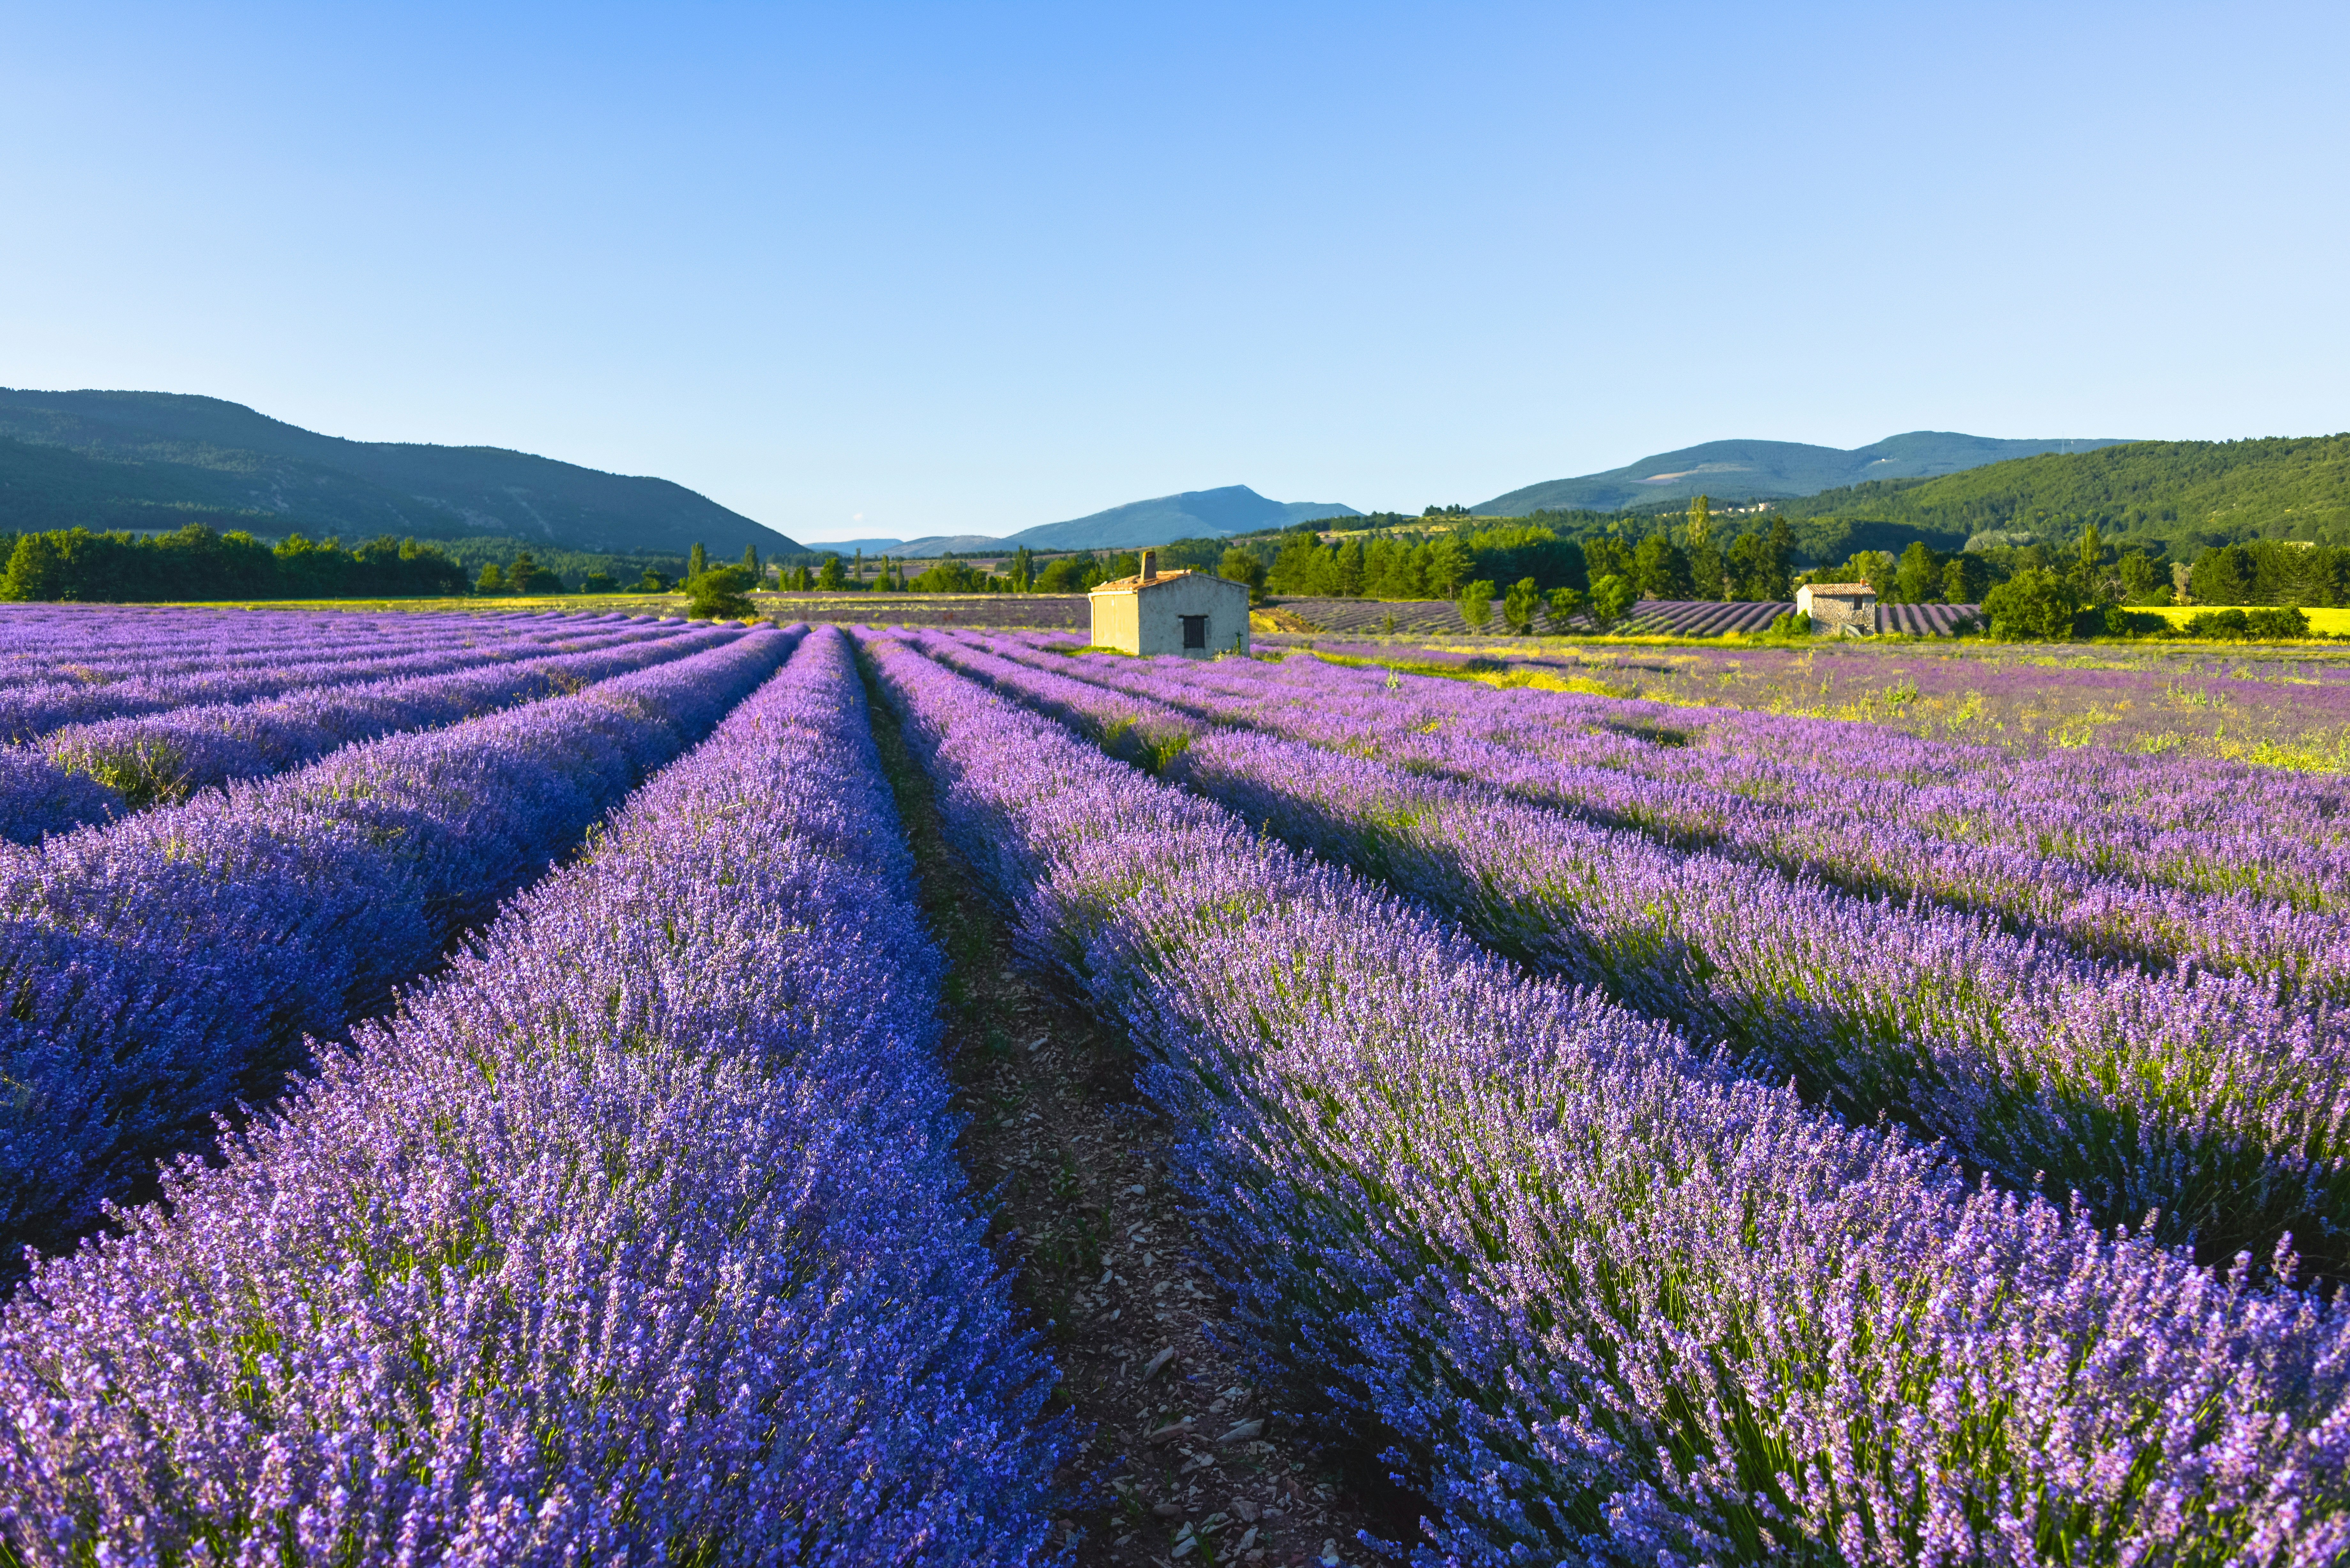 A field is filled with lavender flowers on a sunny day